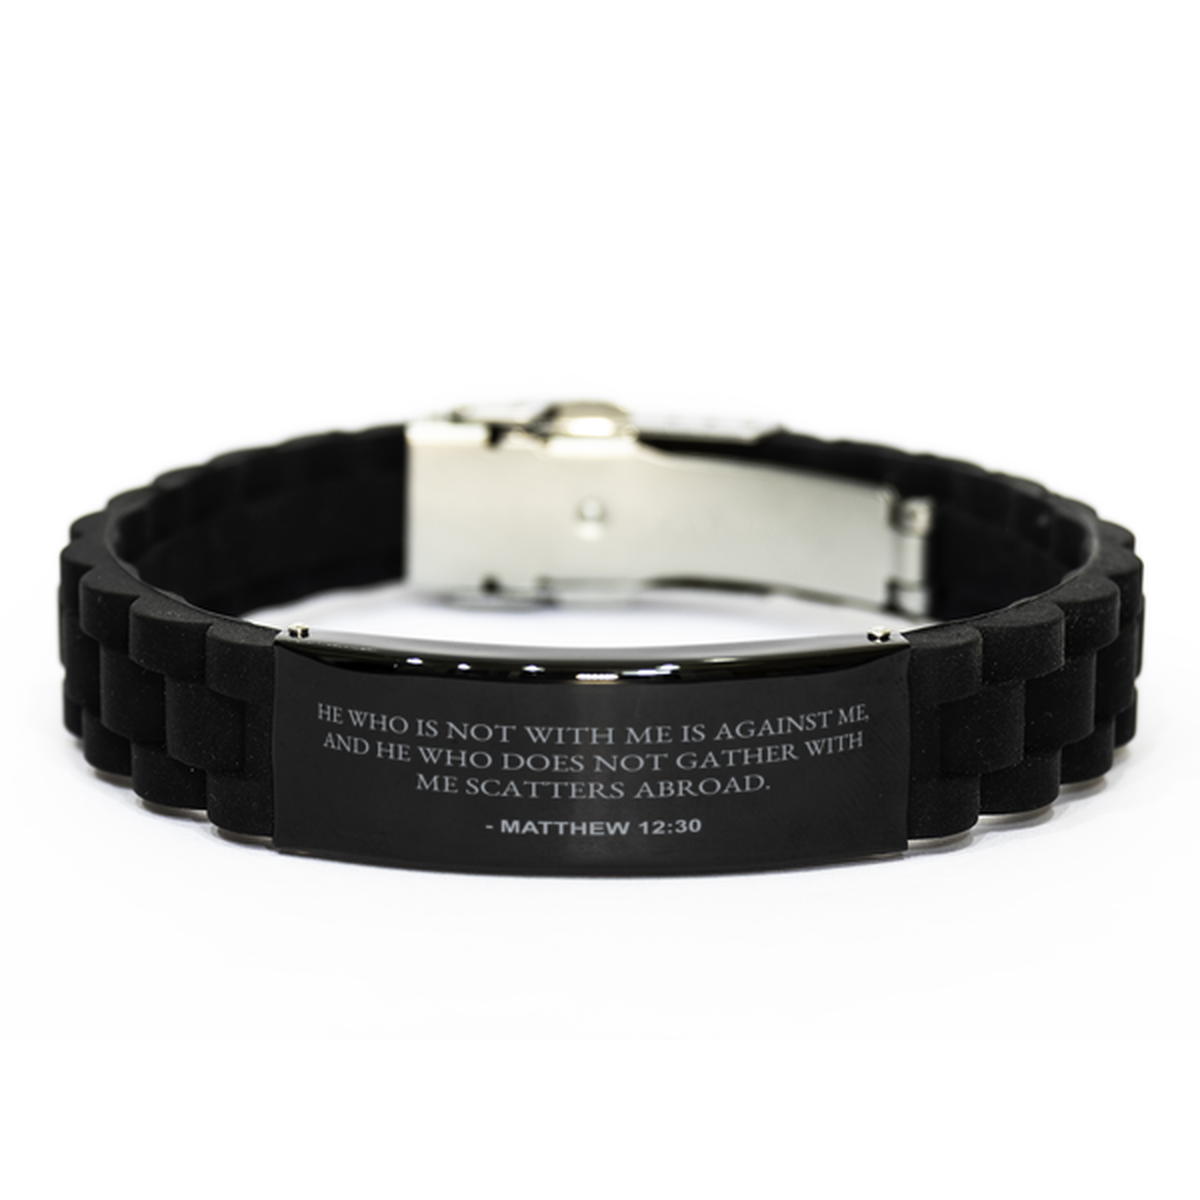 Bible Verse Black Bracelet,, Matthew 12:30 He Who Is Not With Me Is Against Me, And He Who, Inspirational Christian Gifts For Men Women